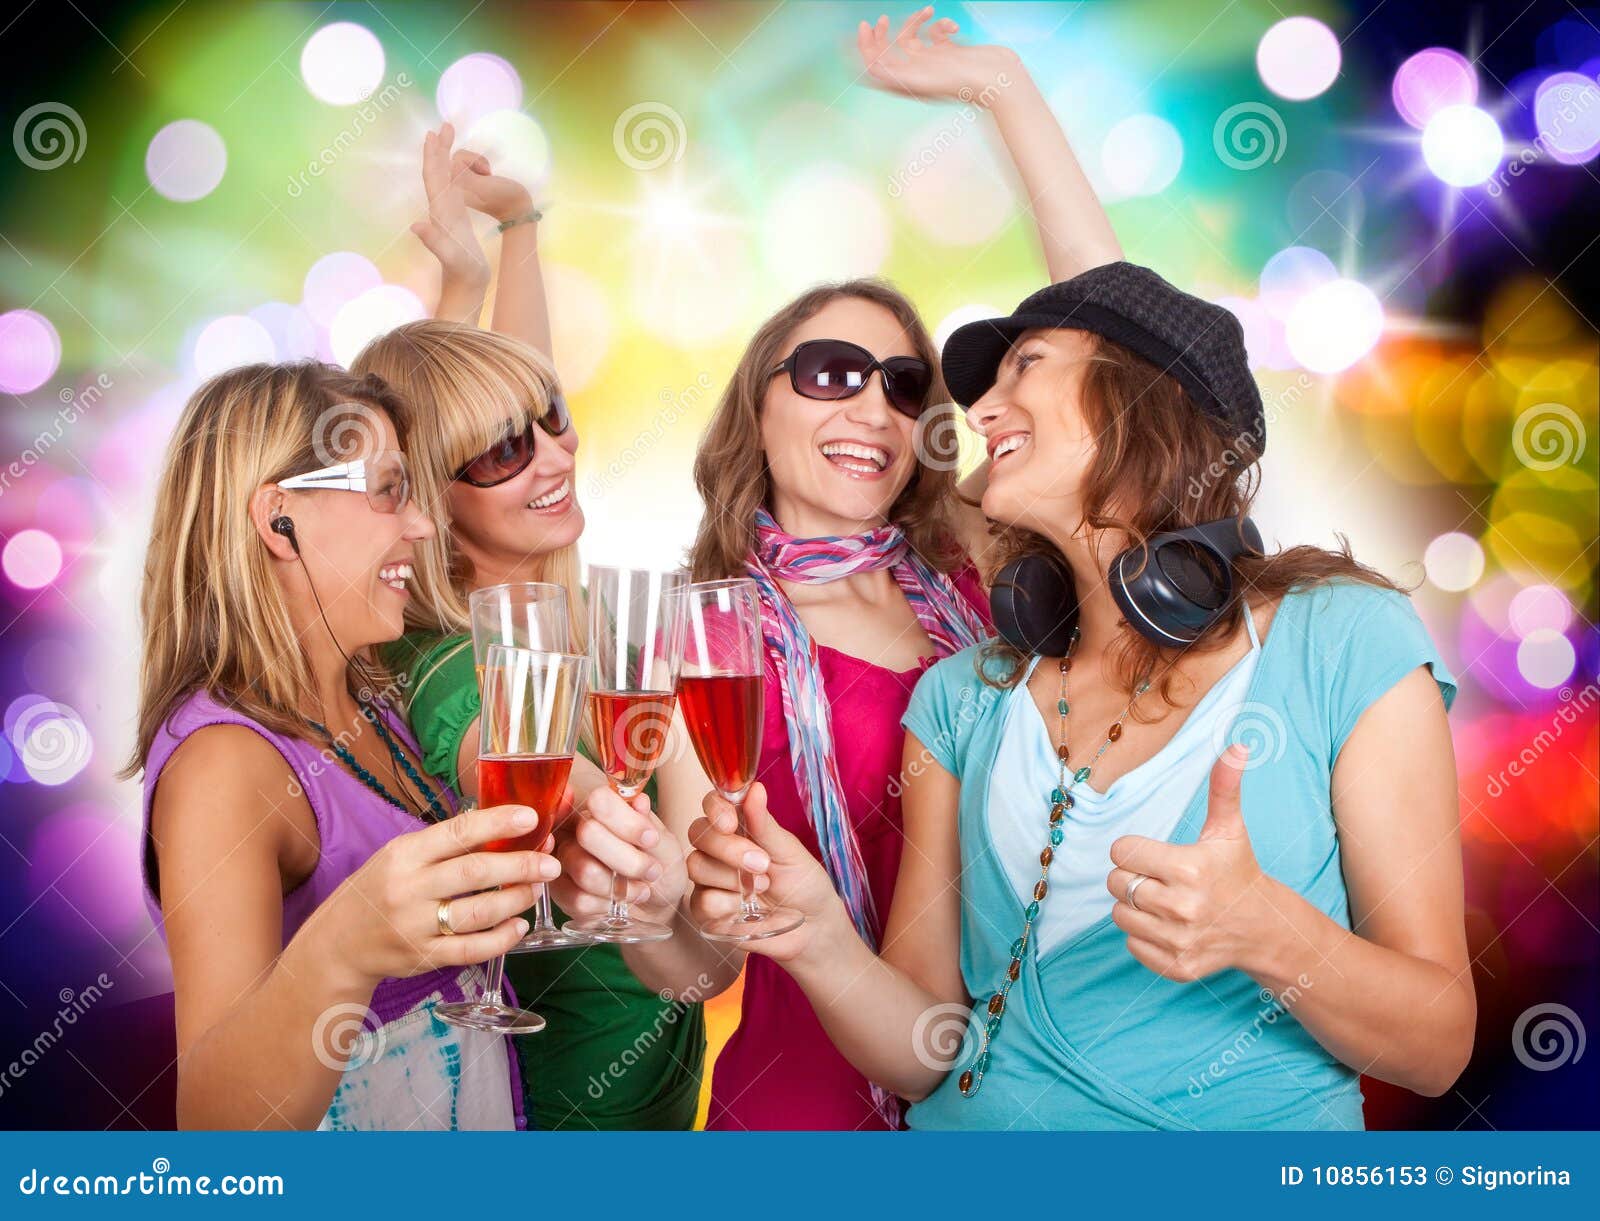 Dancing queens 5 stock image. Image of entertainment - 10856153